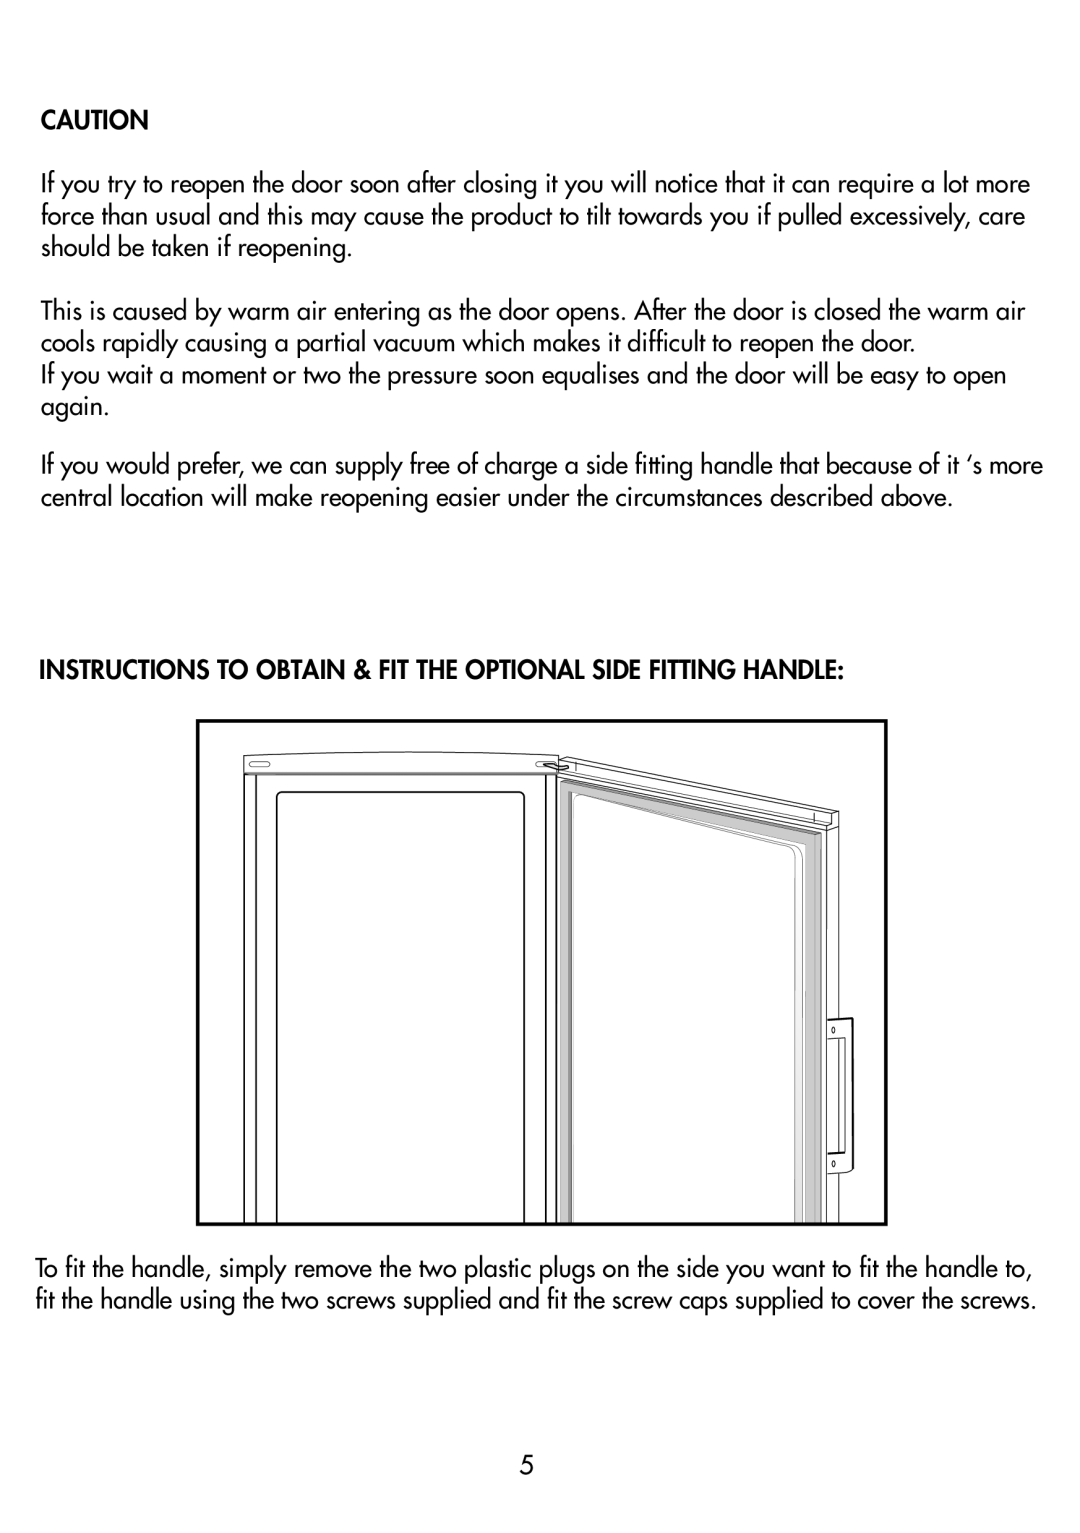 Beko TZDA 568 FS, TZDA 568 FW manual Instructions To Obtain & Fit The Optional Side Fitting Handle 